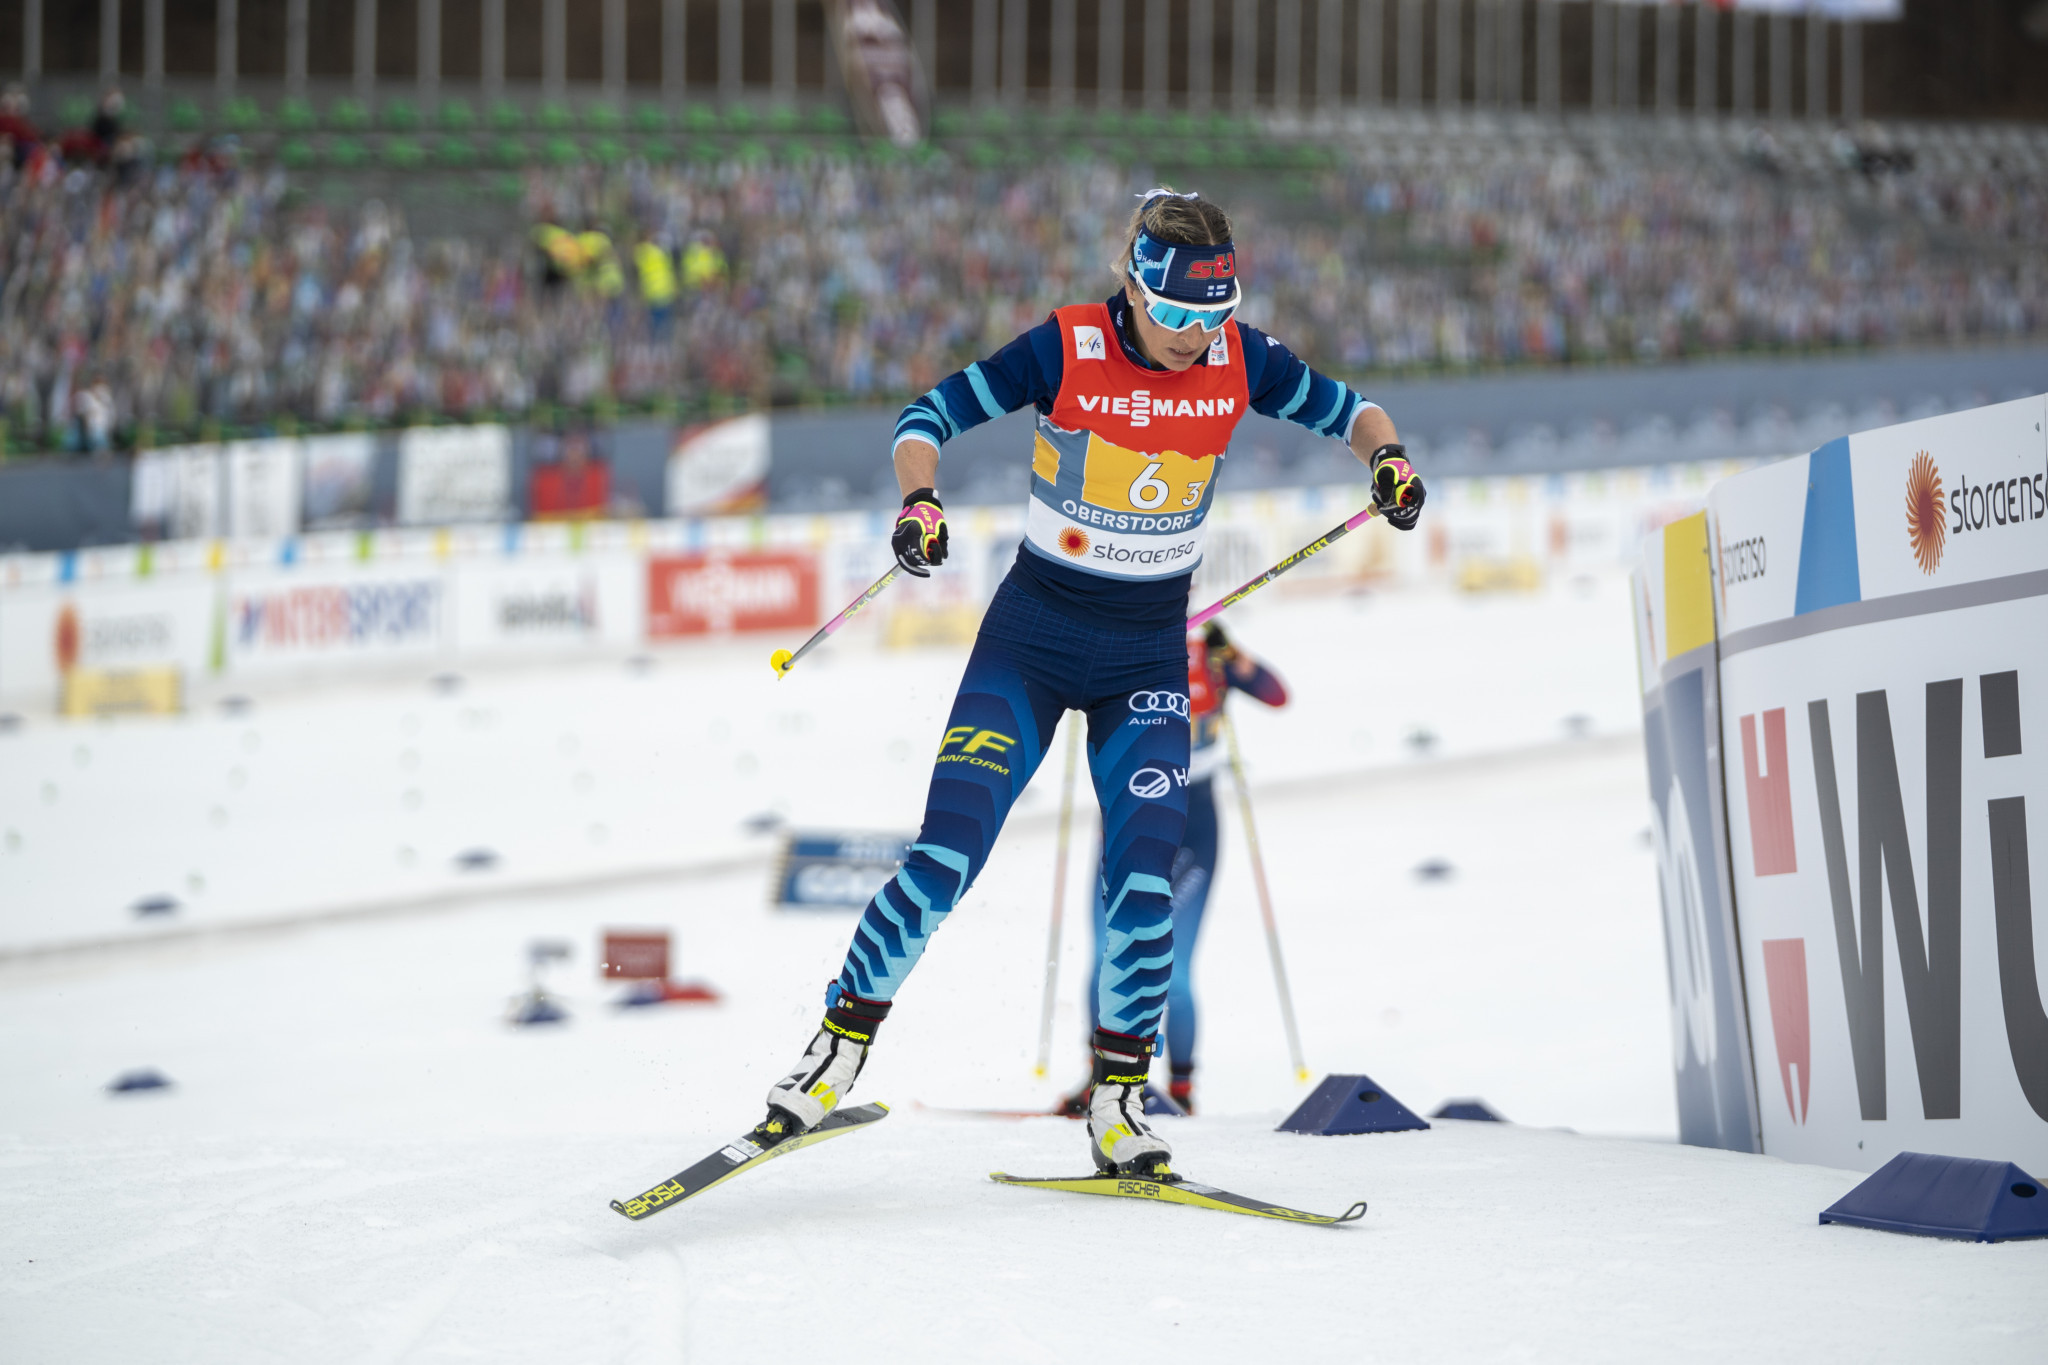 Three-time world champion Roponen retires from cross-country skiing